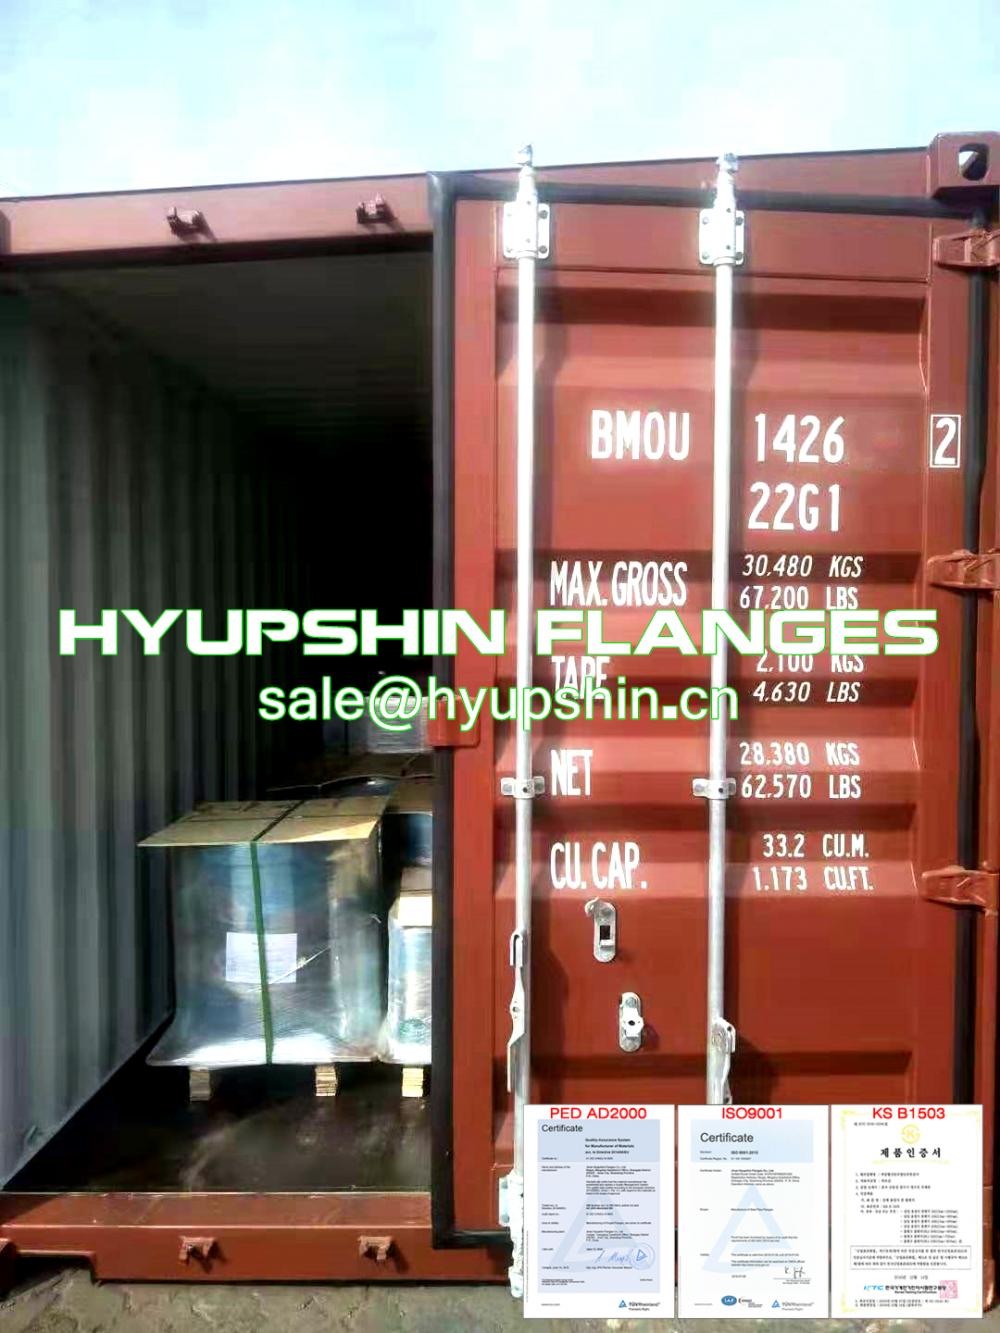 Hyupshin Flanges Export to USA by Sea